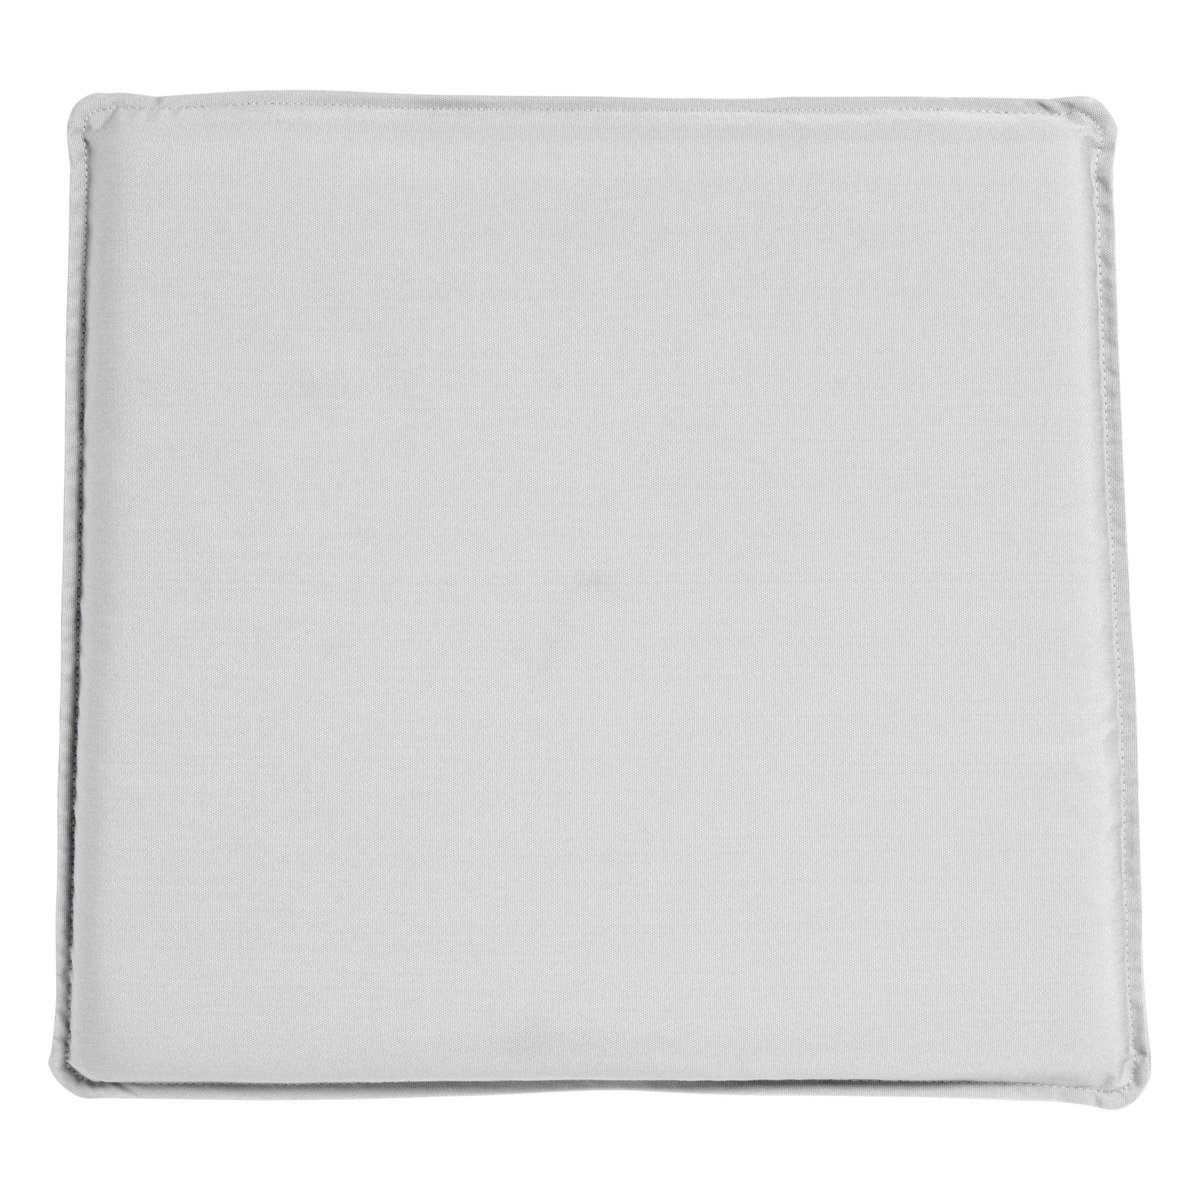 Hay Hee Seat Cushion For Chair, Sky Grey